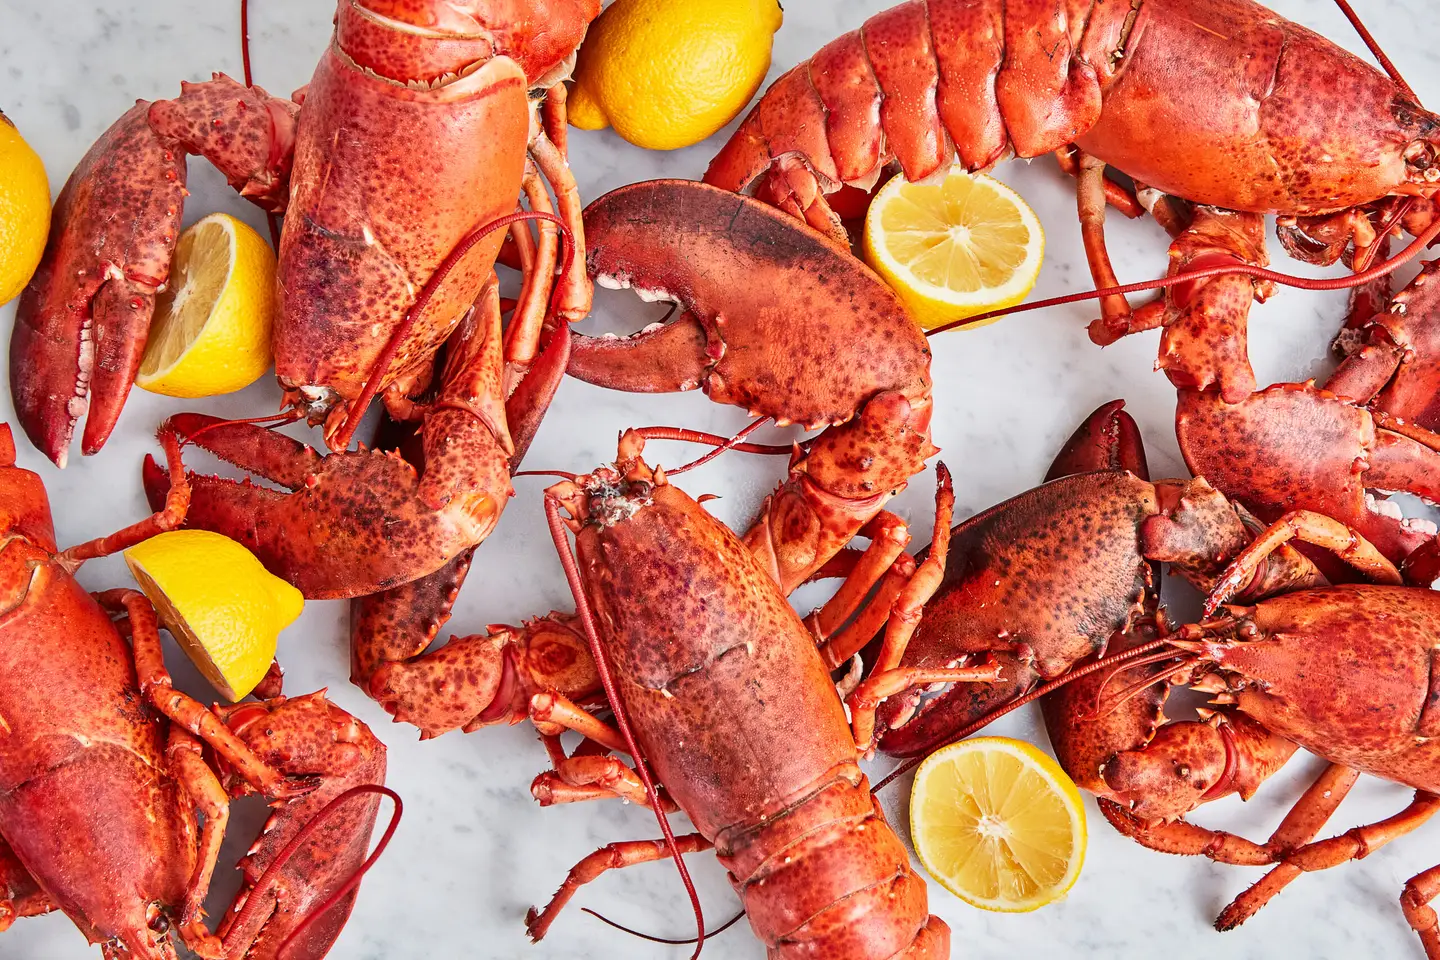 https://recipes.net/wp-content/uploads/2023/10/how-to-cook-a-lobster-at-home-1697706241.jpg